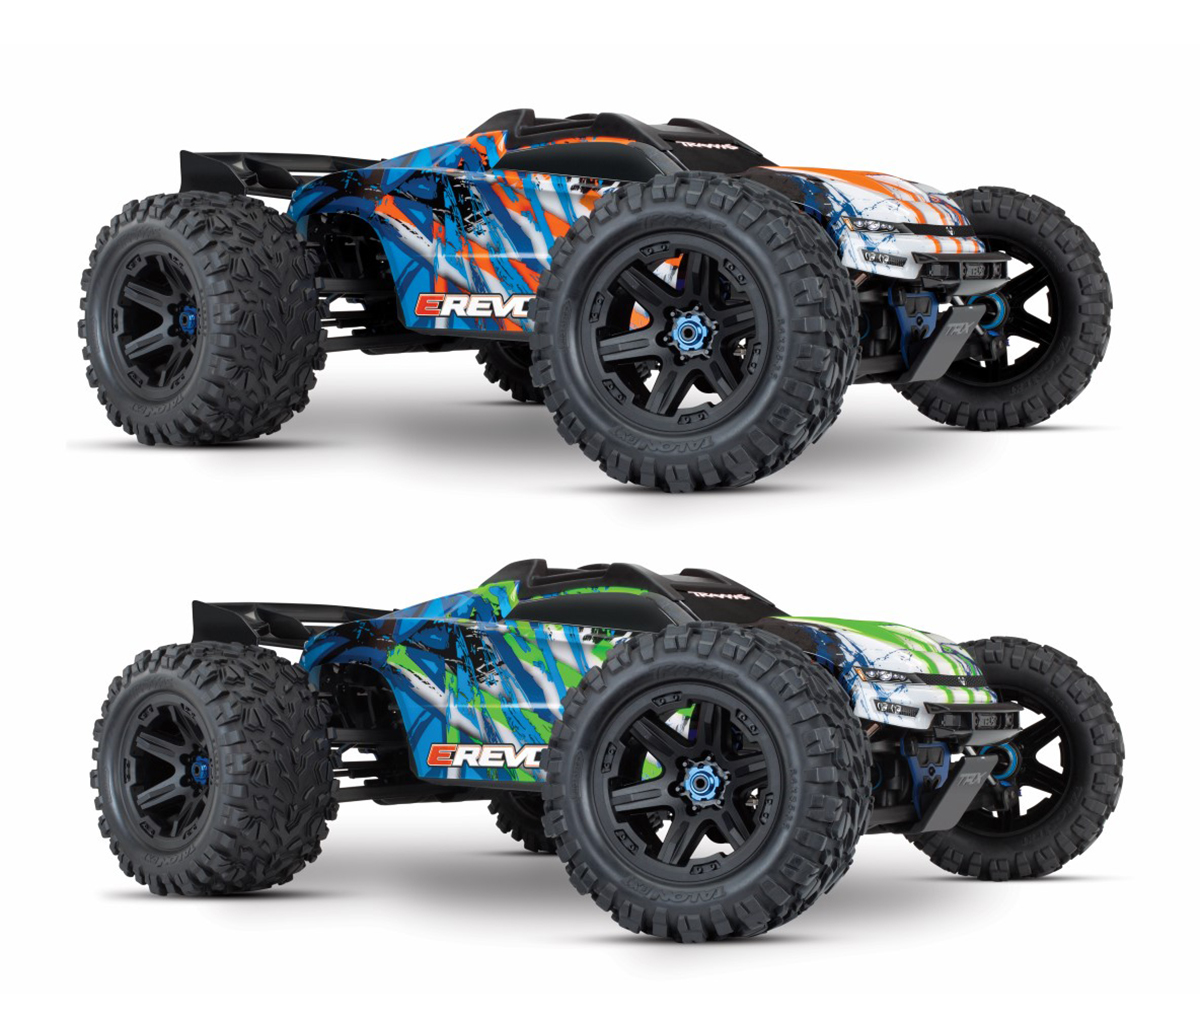 E-REVO REBORN: Mighty Monster Is All-New - RC Car Action